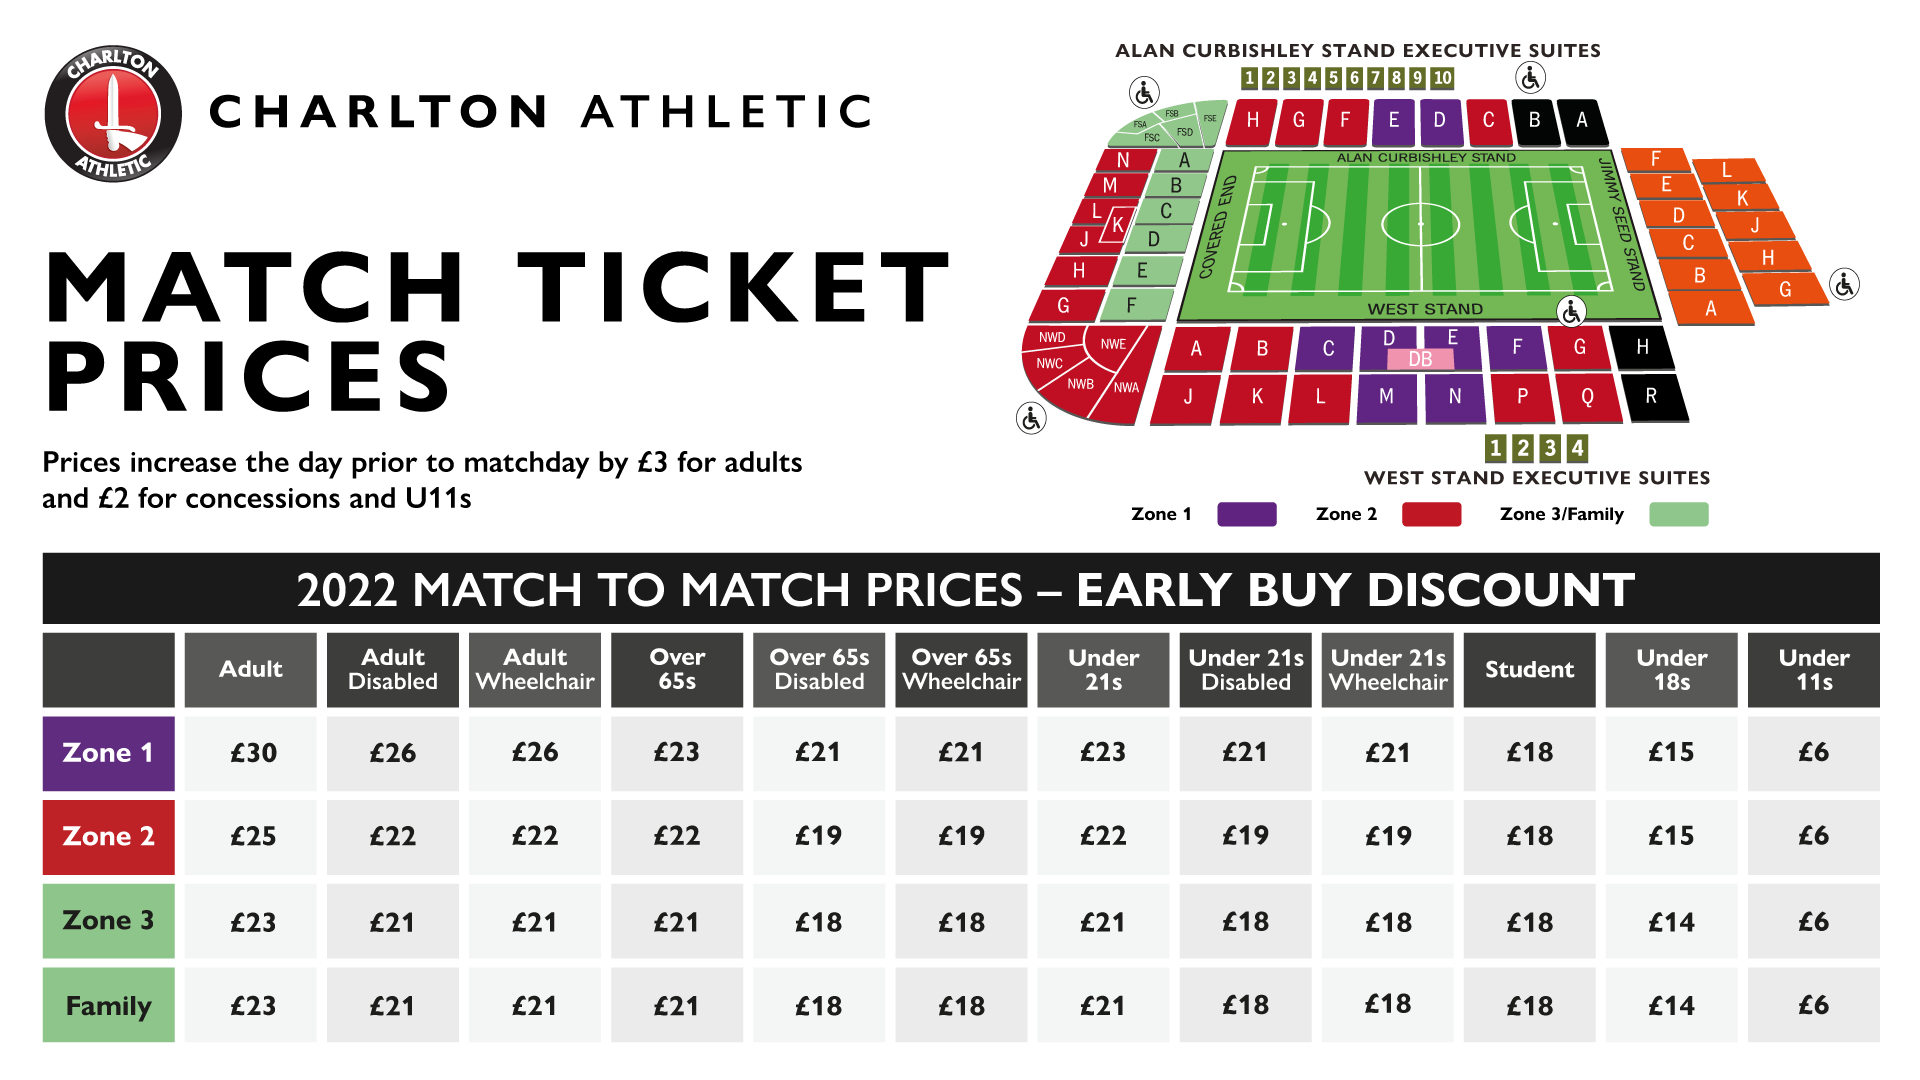 Match ticket prices for the 2022